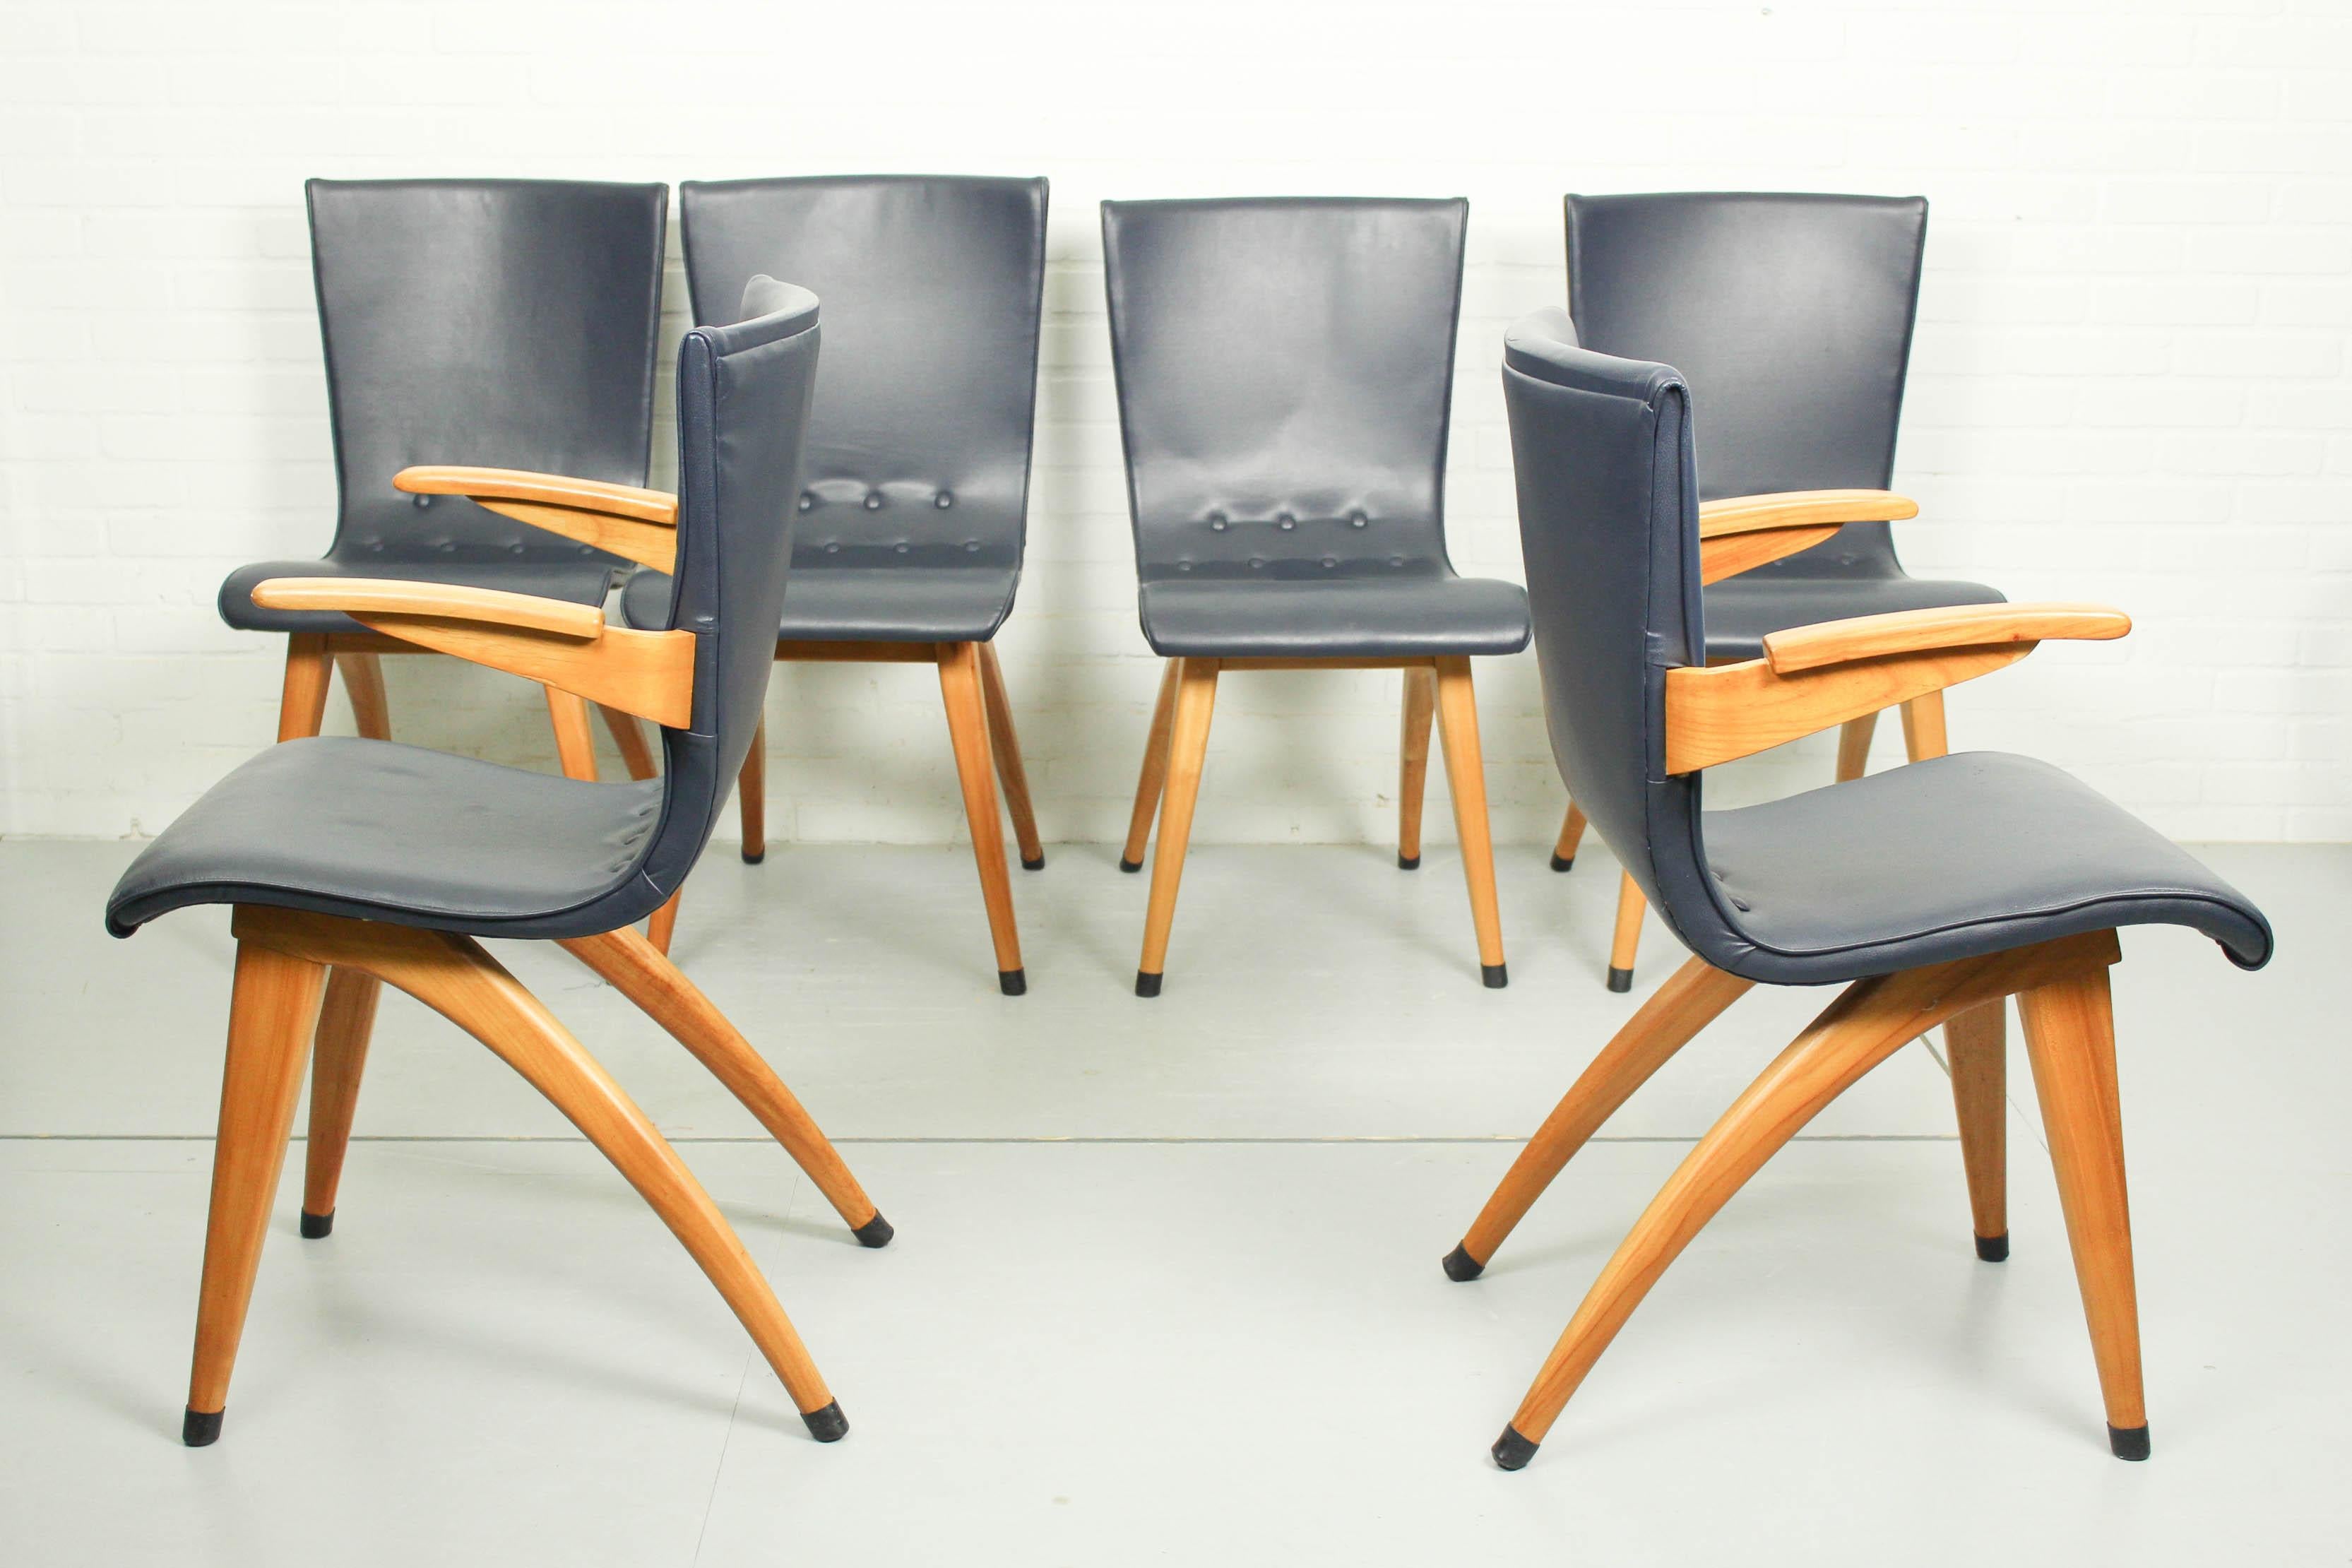 Dutch Set of 6 Cor Van Os Leatherette Dining Chair Model Swing, 1960s For Sale